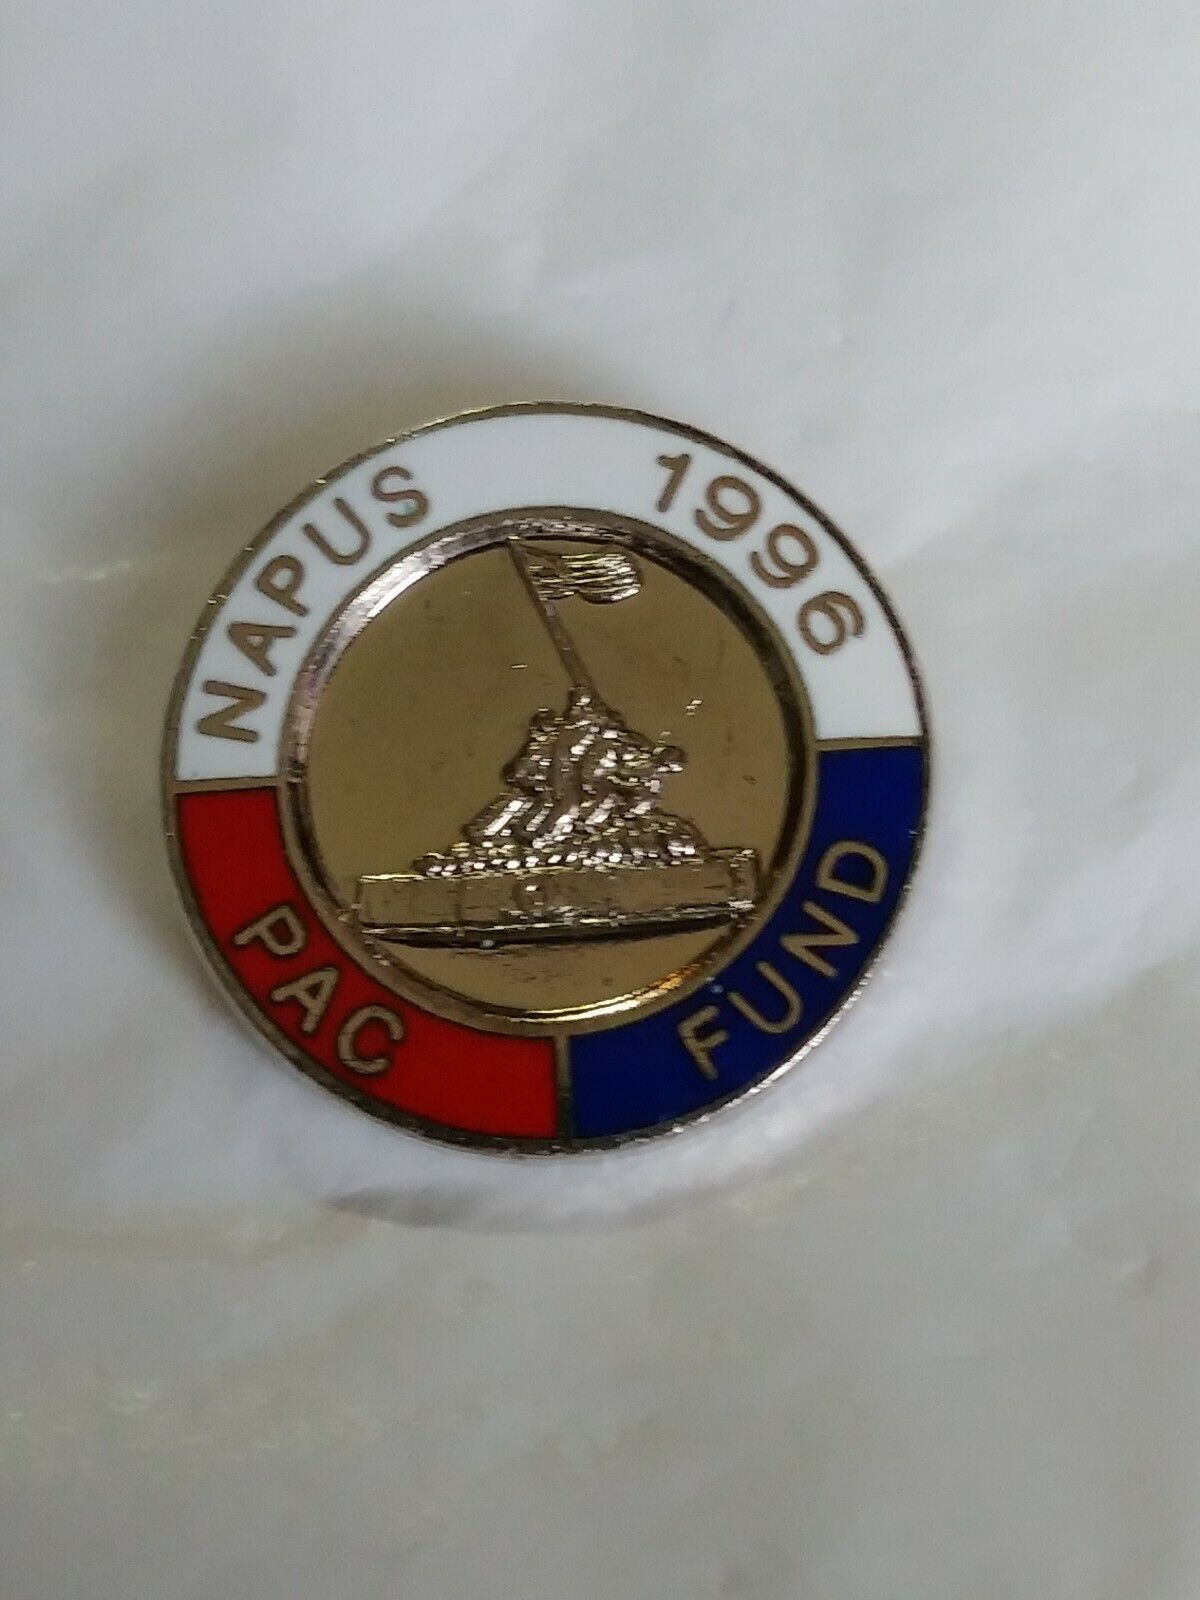 NAPUS 1996 PAC Fund Lapel Hat Pin Postmaster Political Action Committee Vintage